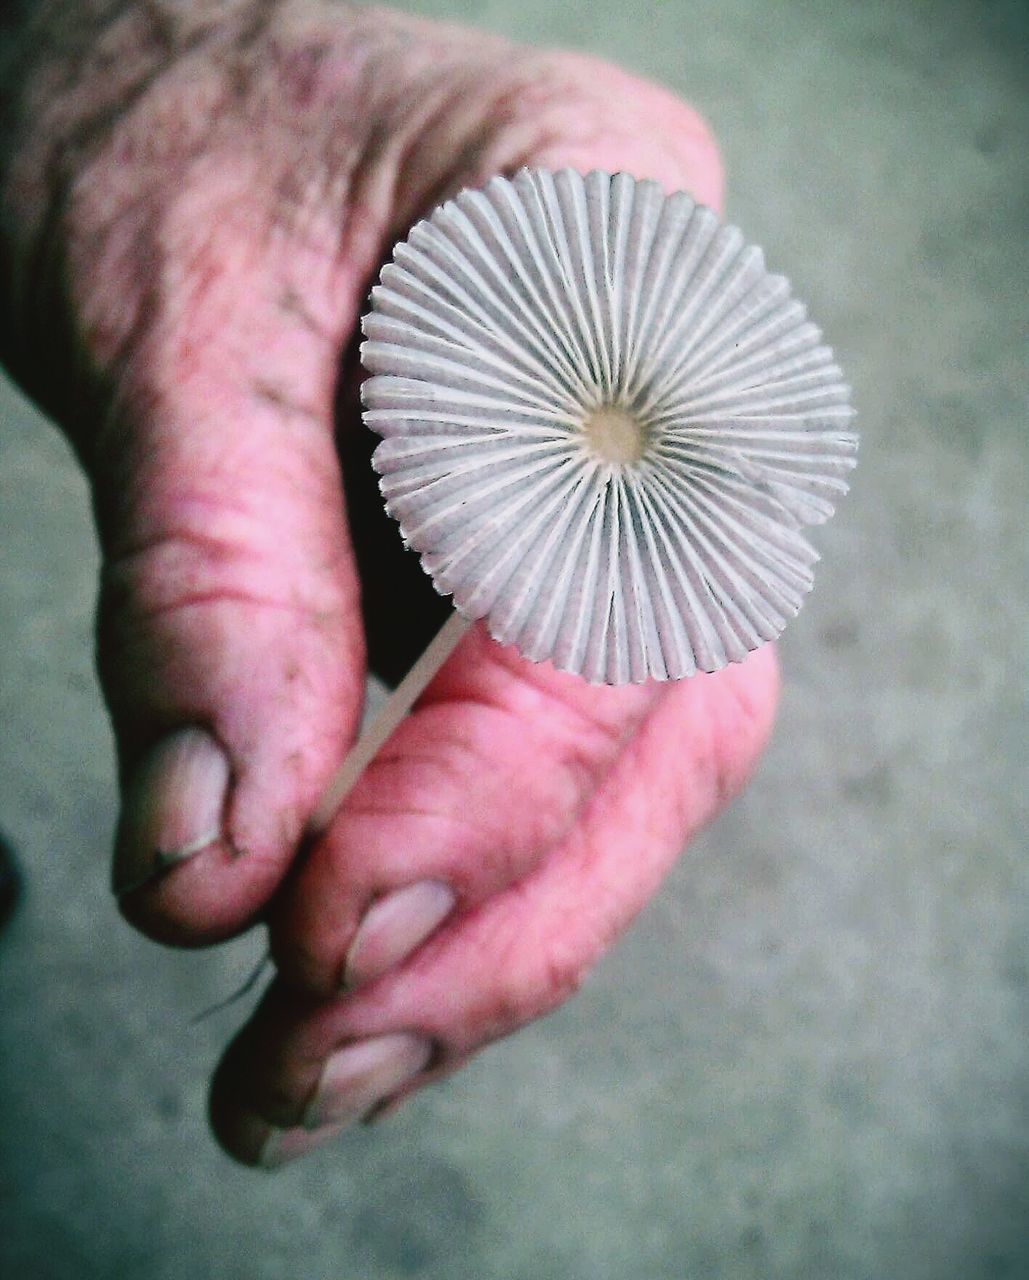 CLOSE-UP OF PERSON HAND HOLDING WHITE FLOWER